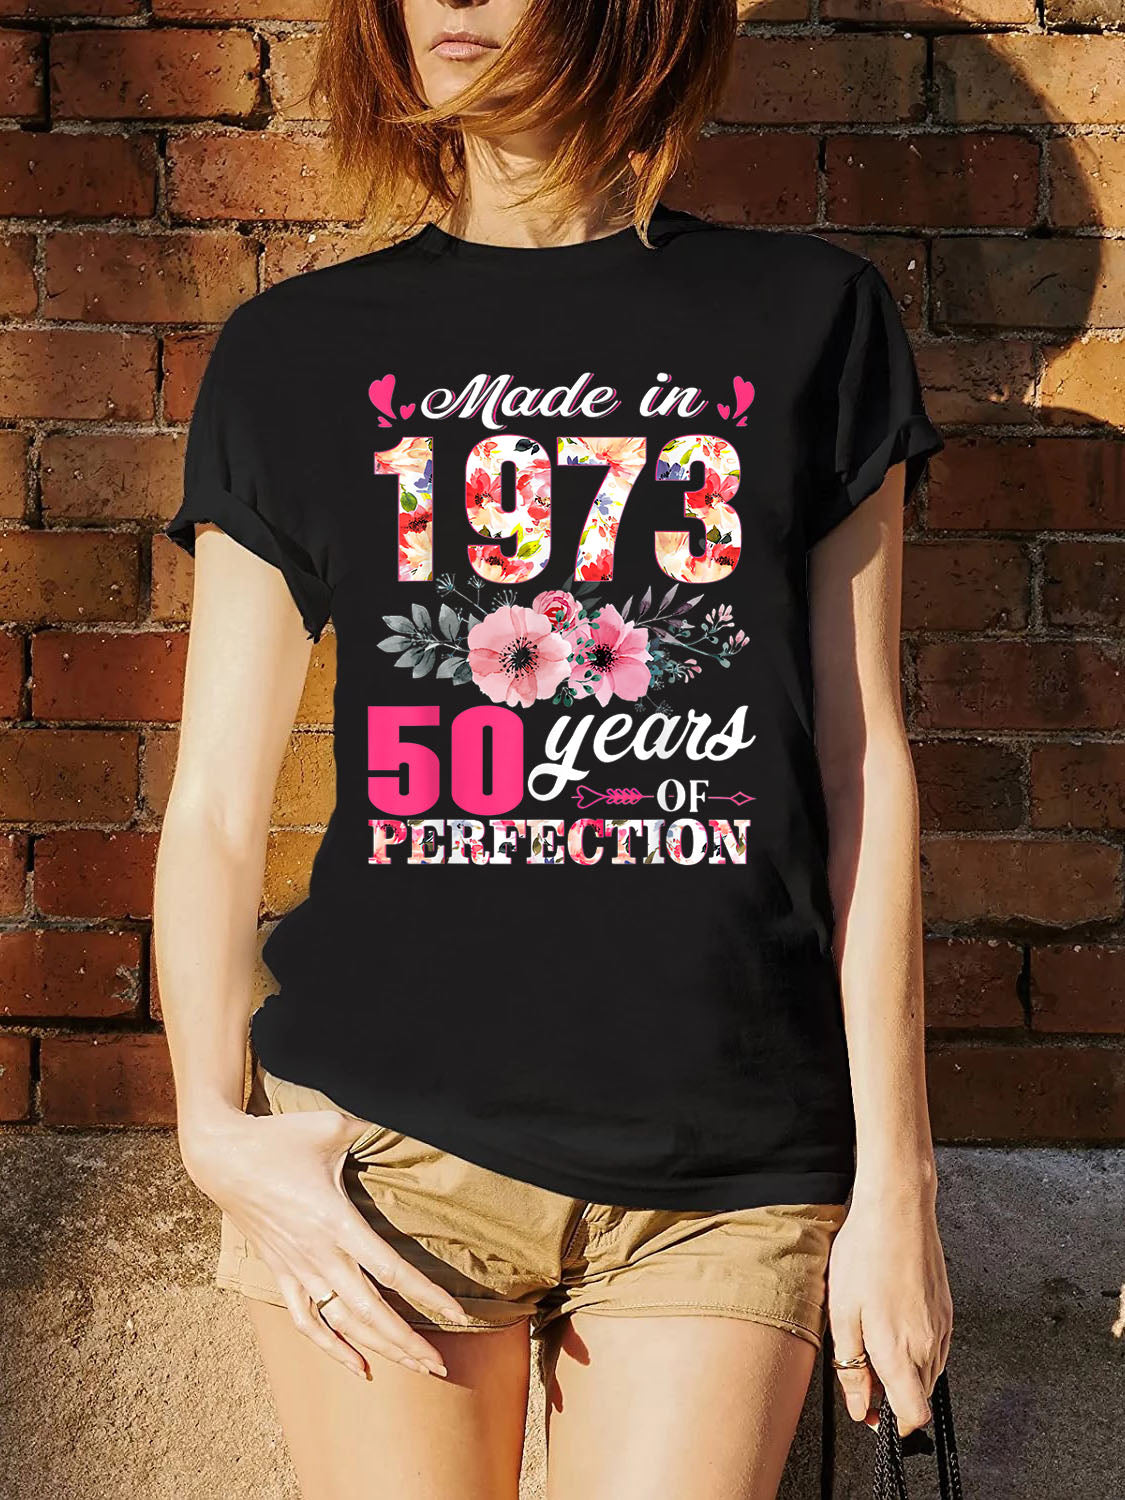 Born In 1973 Floral 50 Years Old Birthday Women T-Shirt Printed Top Unisex Casual Tee Streetwear